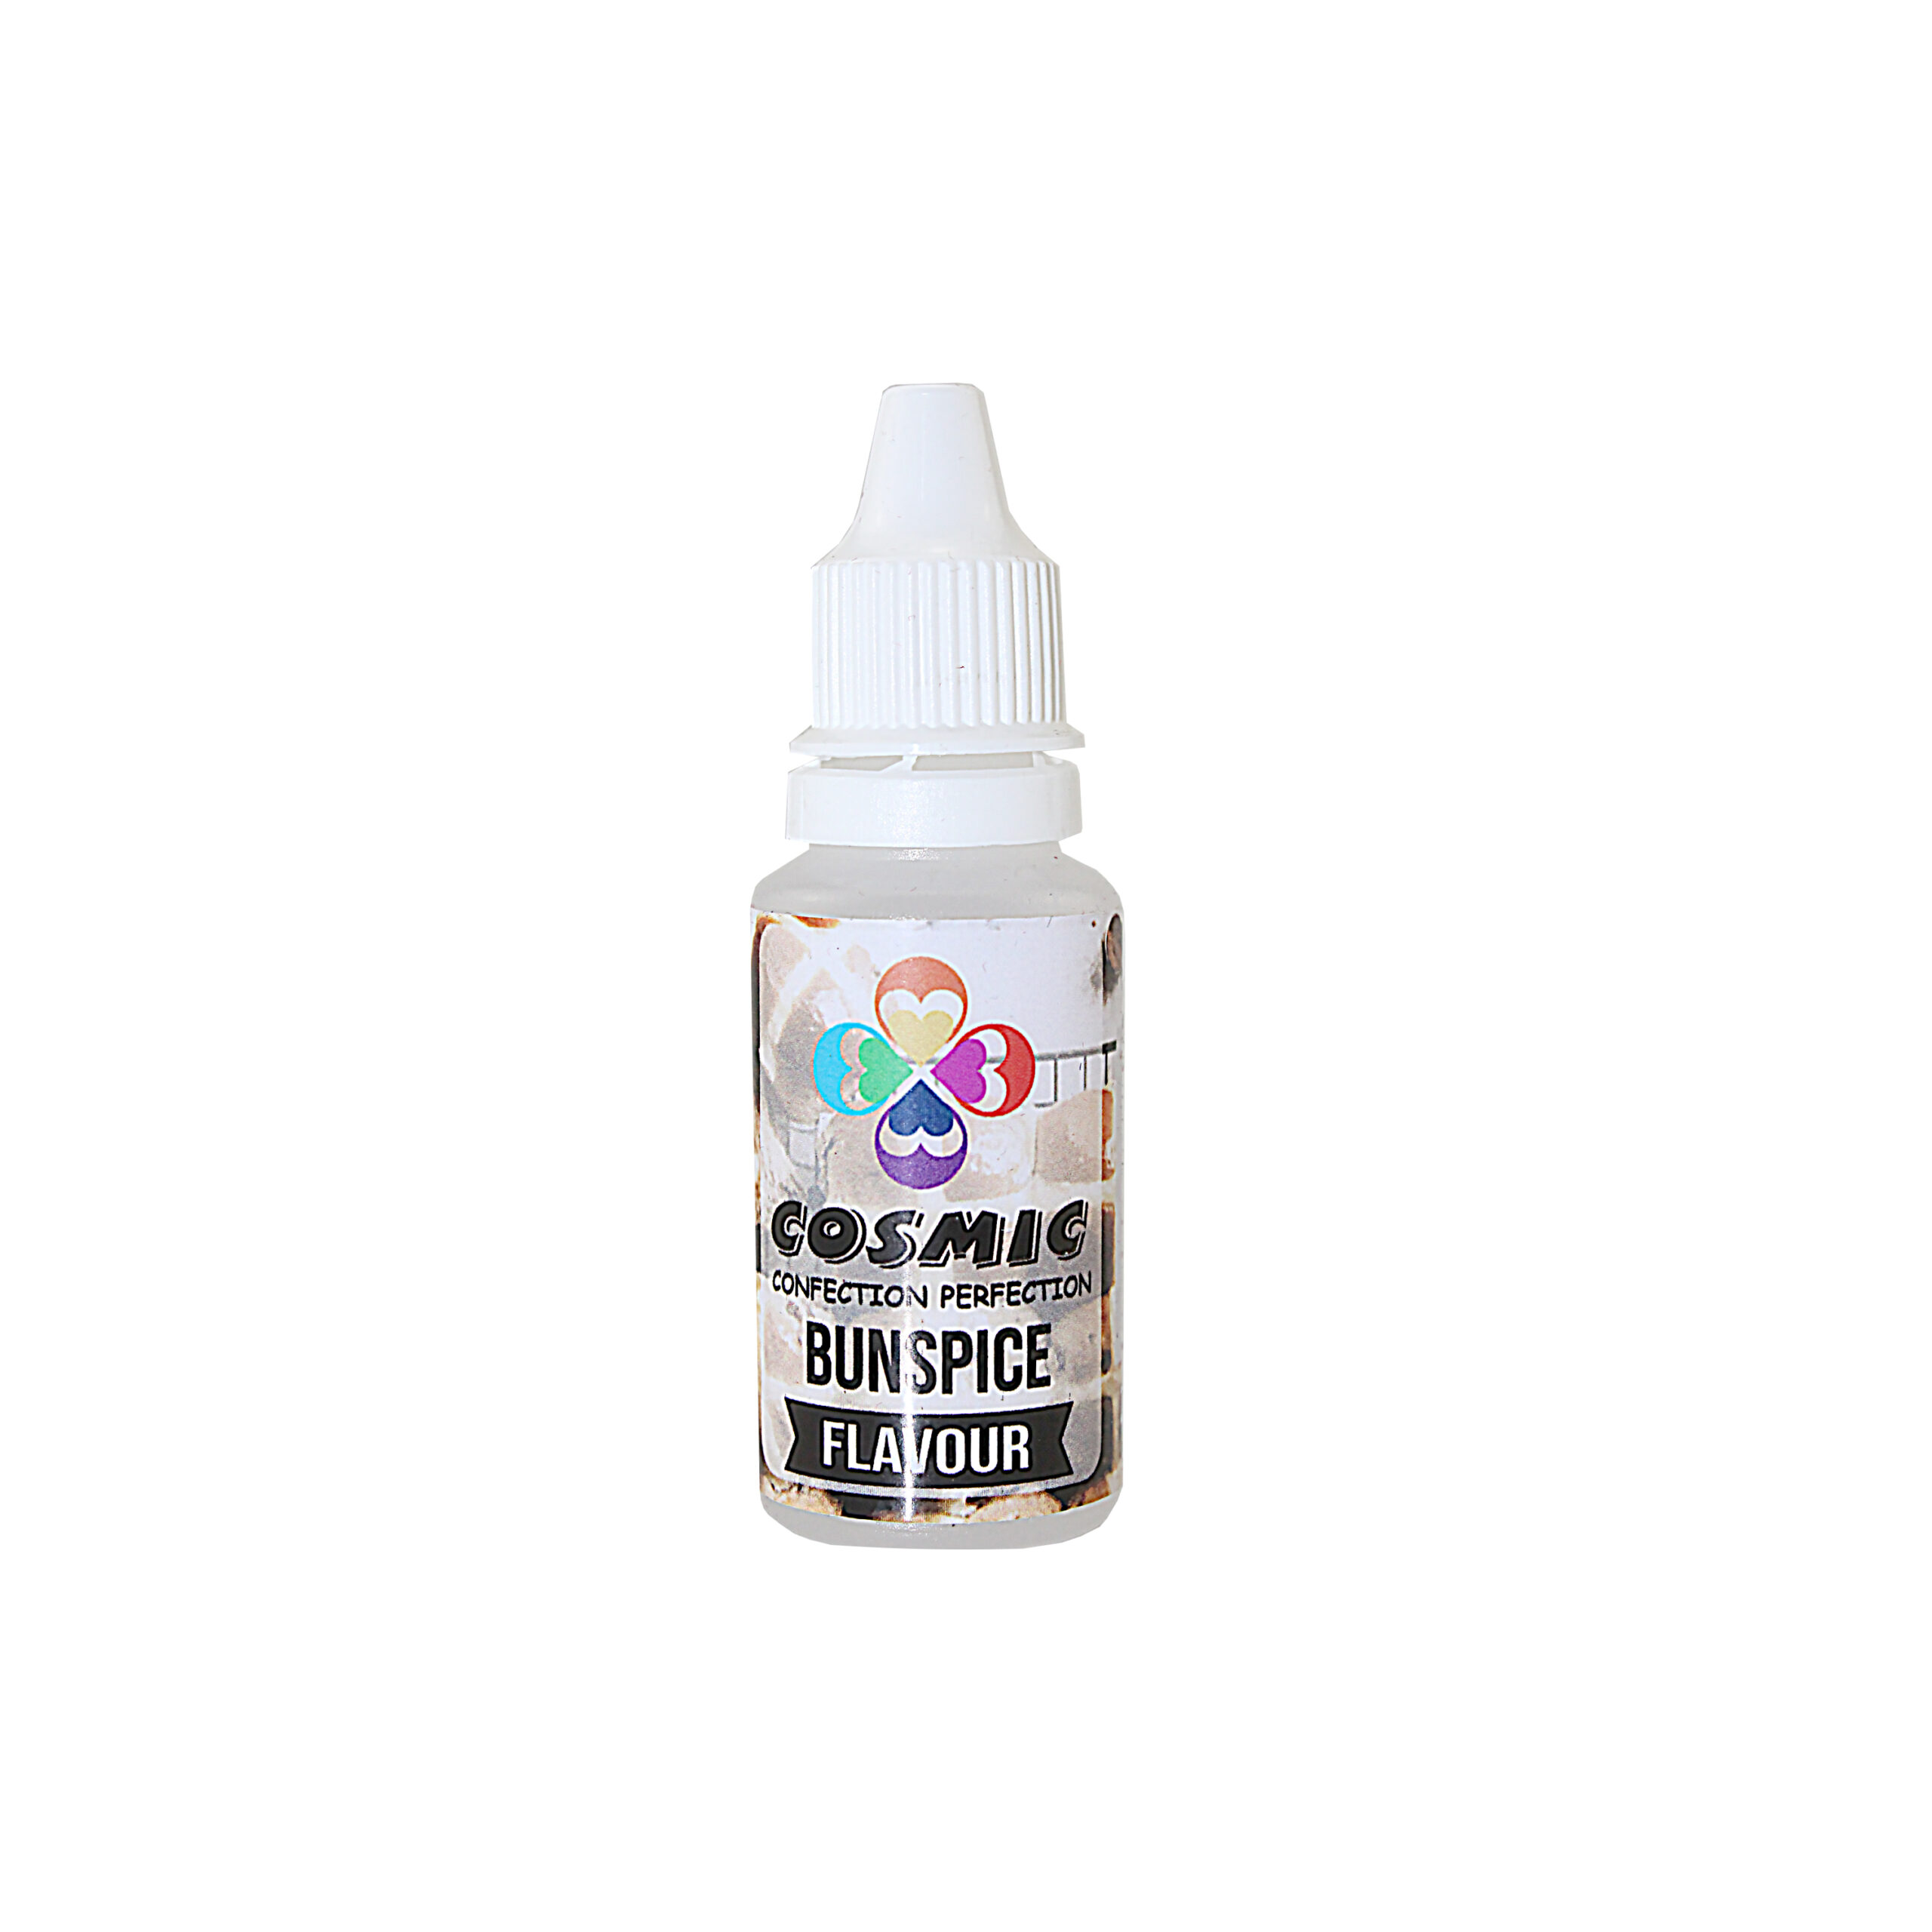 COSMIC  FOOD
FLAVOURING  20g 
BUNSPICE